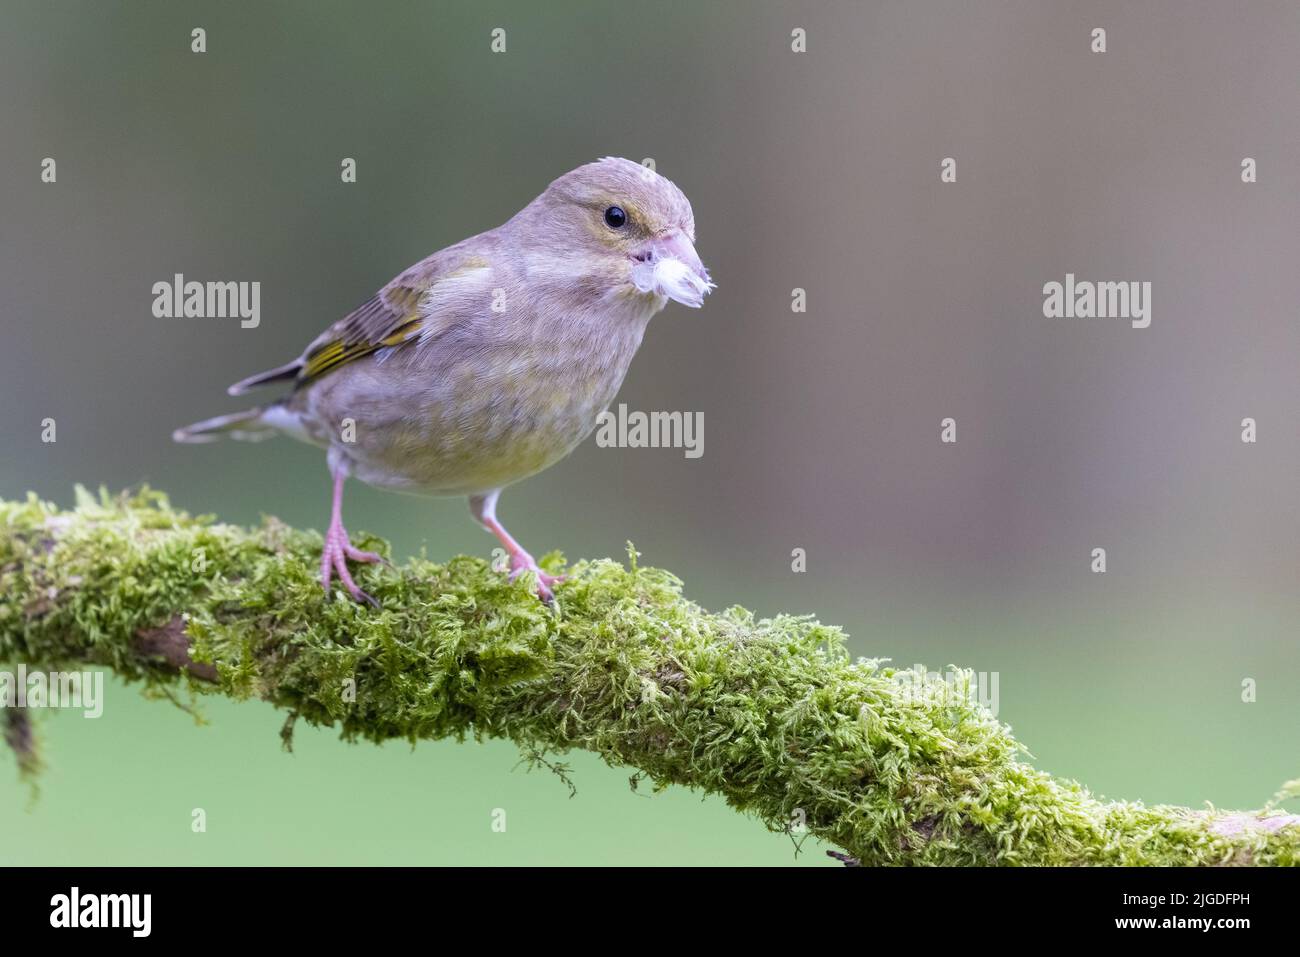 Female Greenfinch [ Chloris chloris ] on mossy branch with white feather in its beak and out of focus background Stock Photo